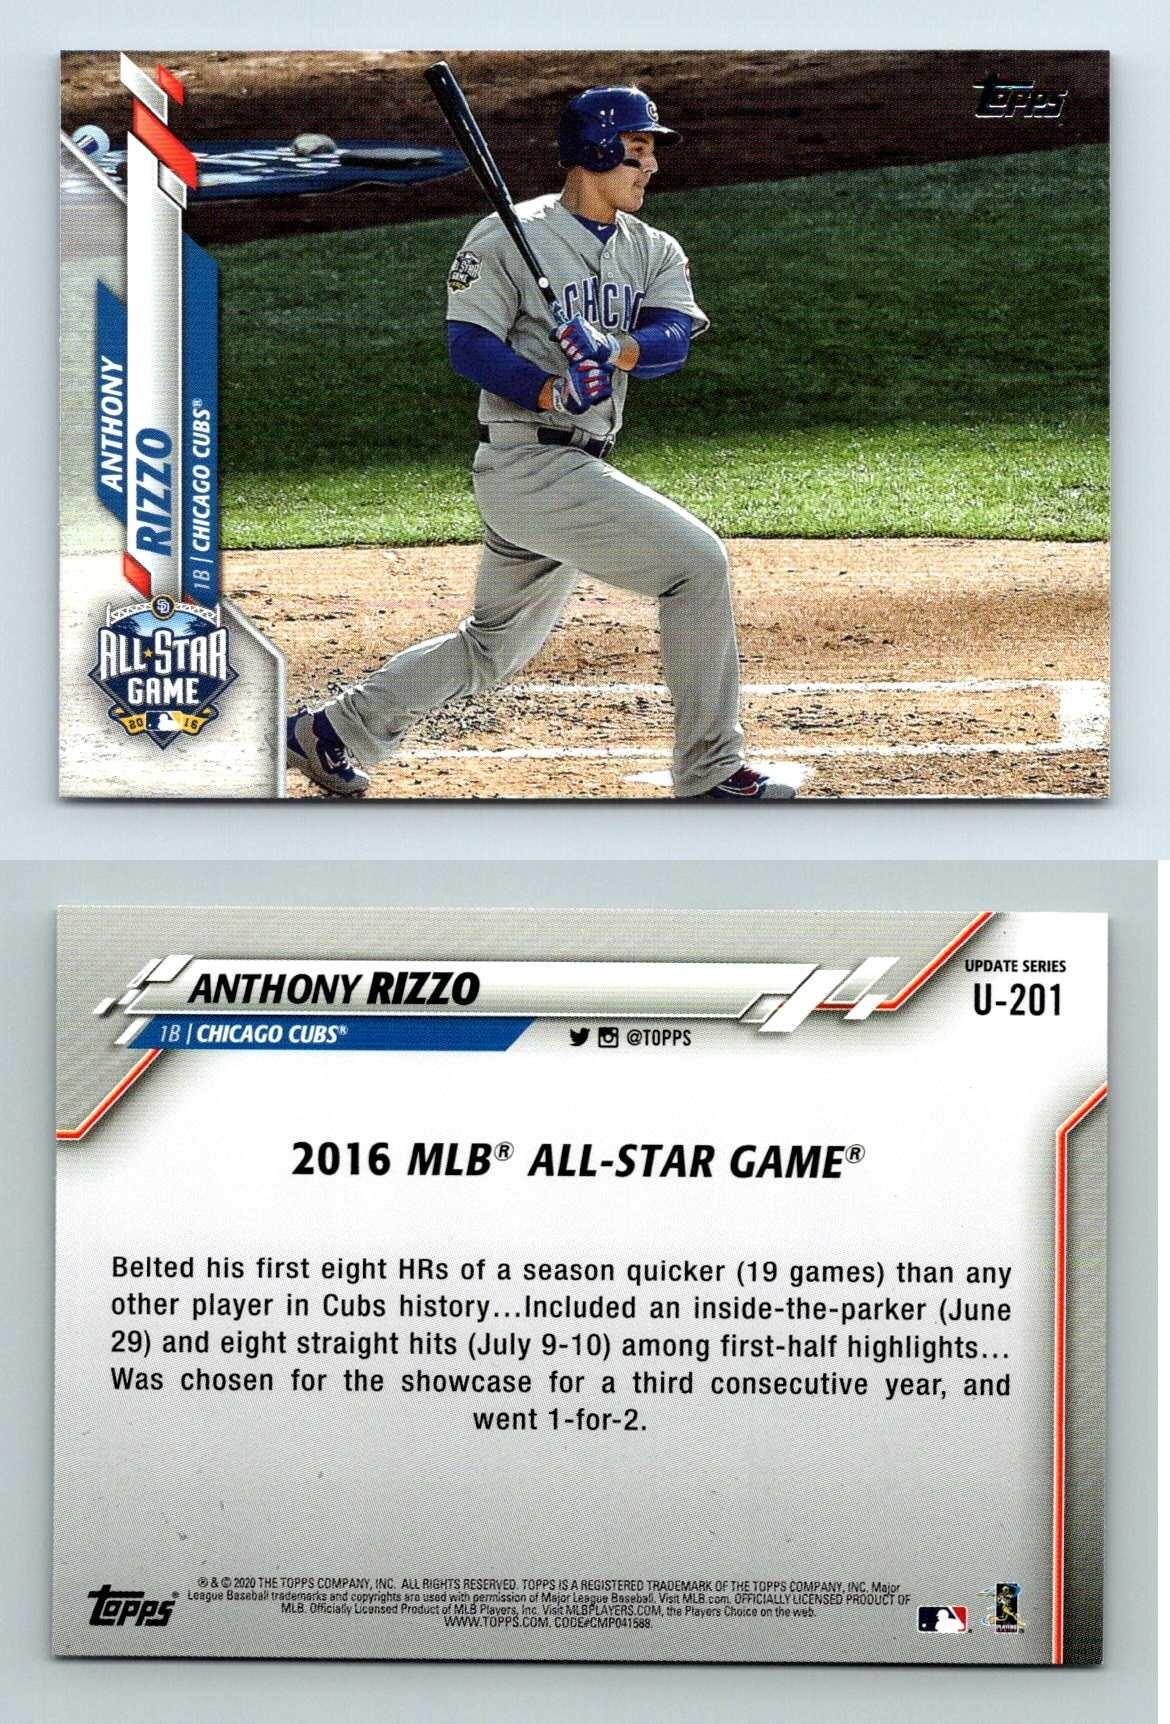 2011 Topps Traded Baseball Updates and Highlights Series Complete